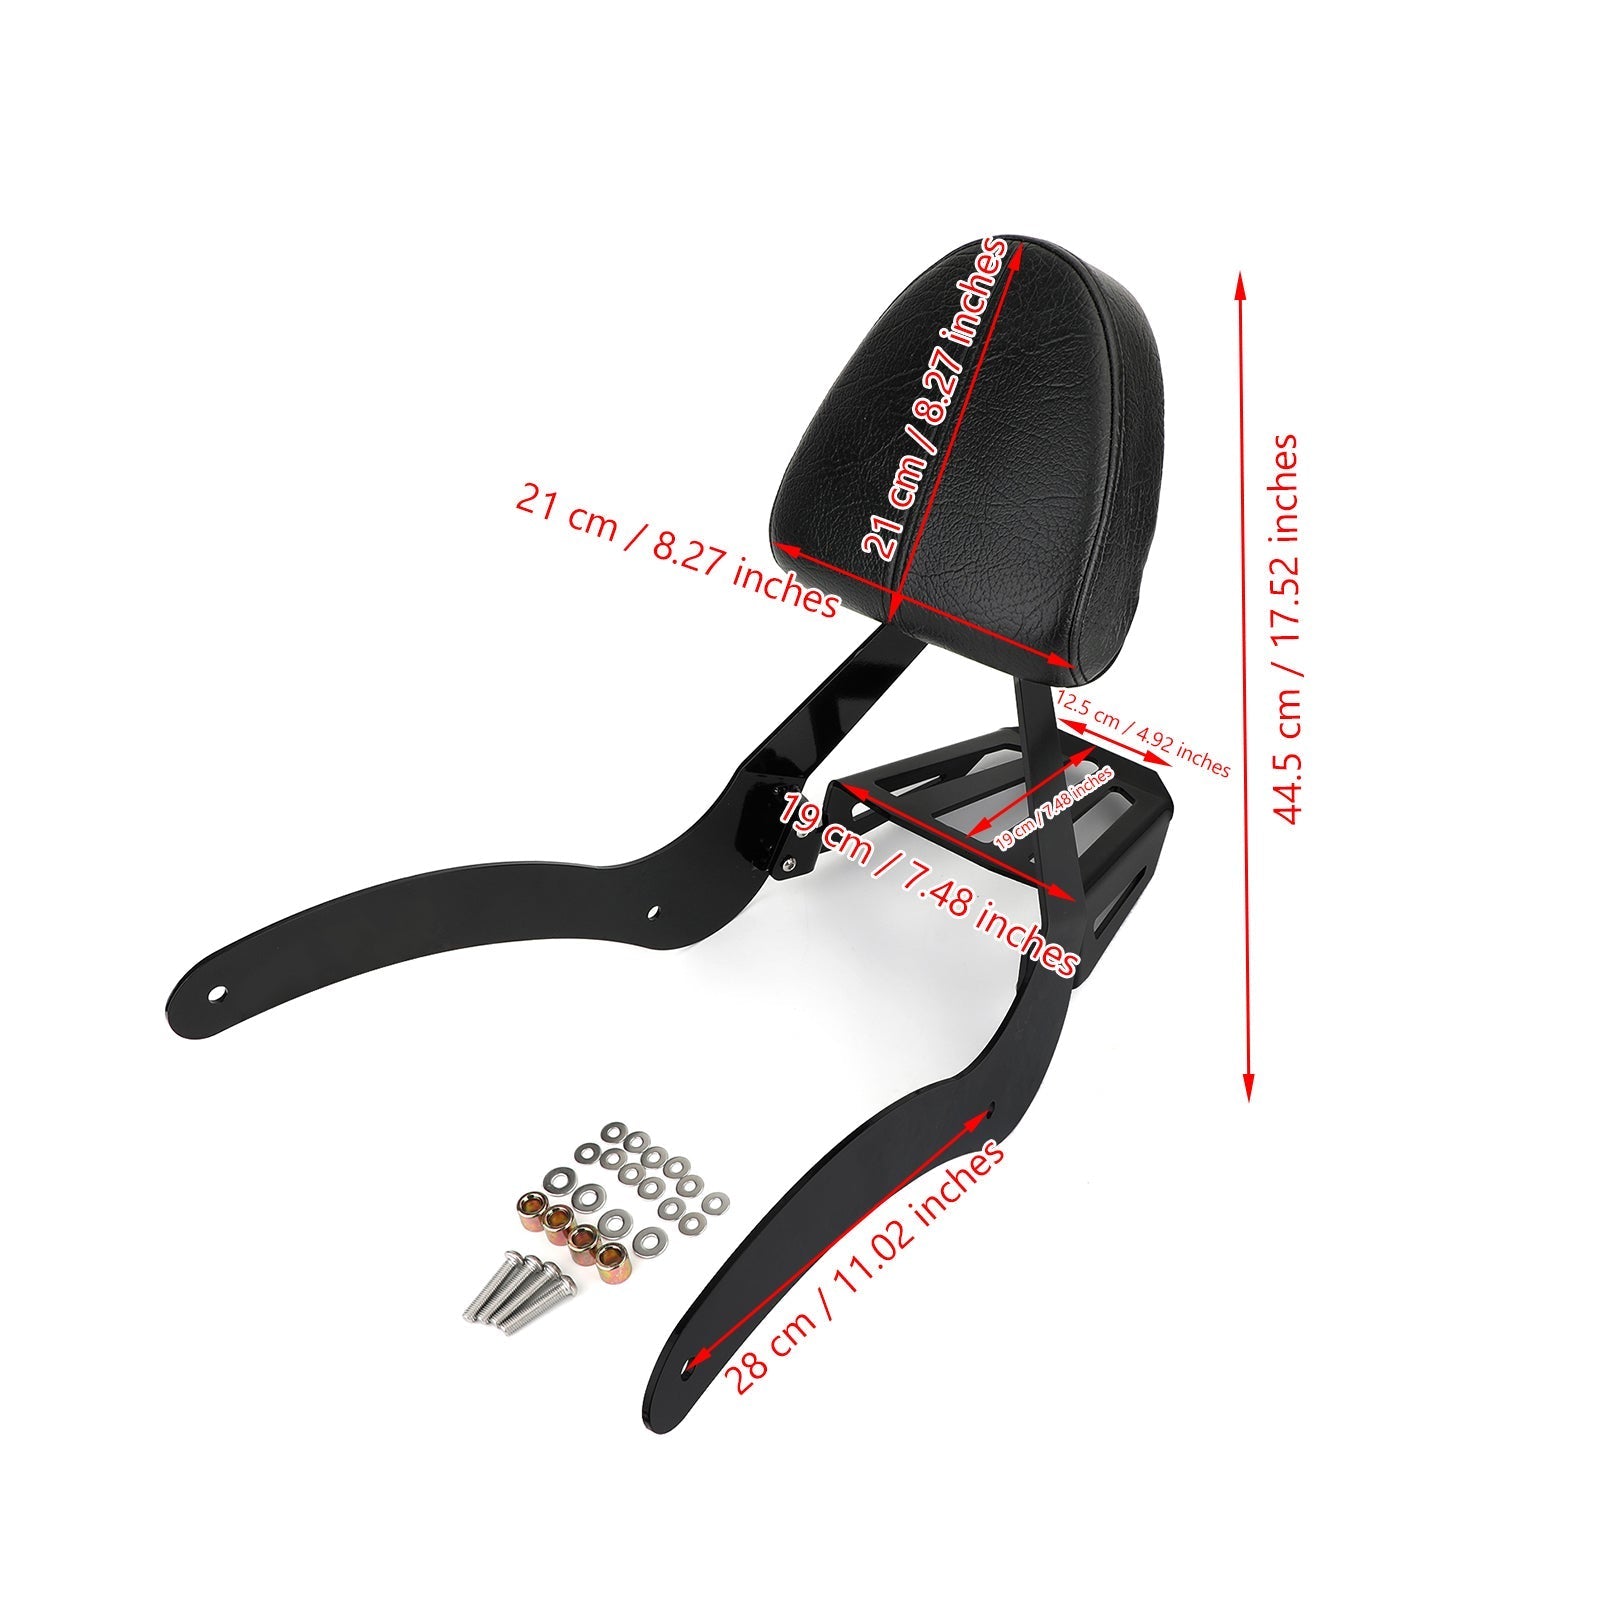 2014-2020 Indian Scout Sixty / Scout passager Sissy Bar dossier porte-bagages